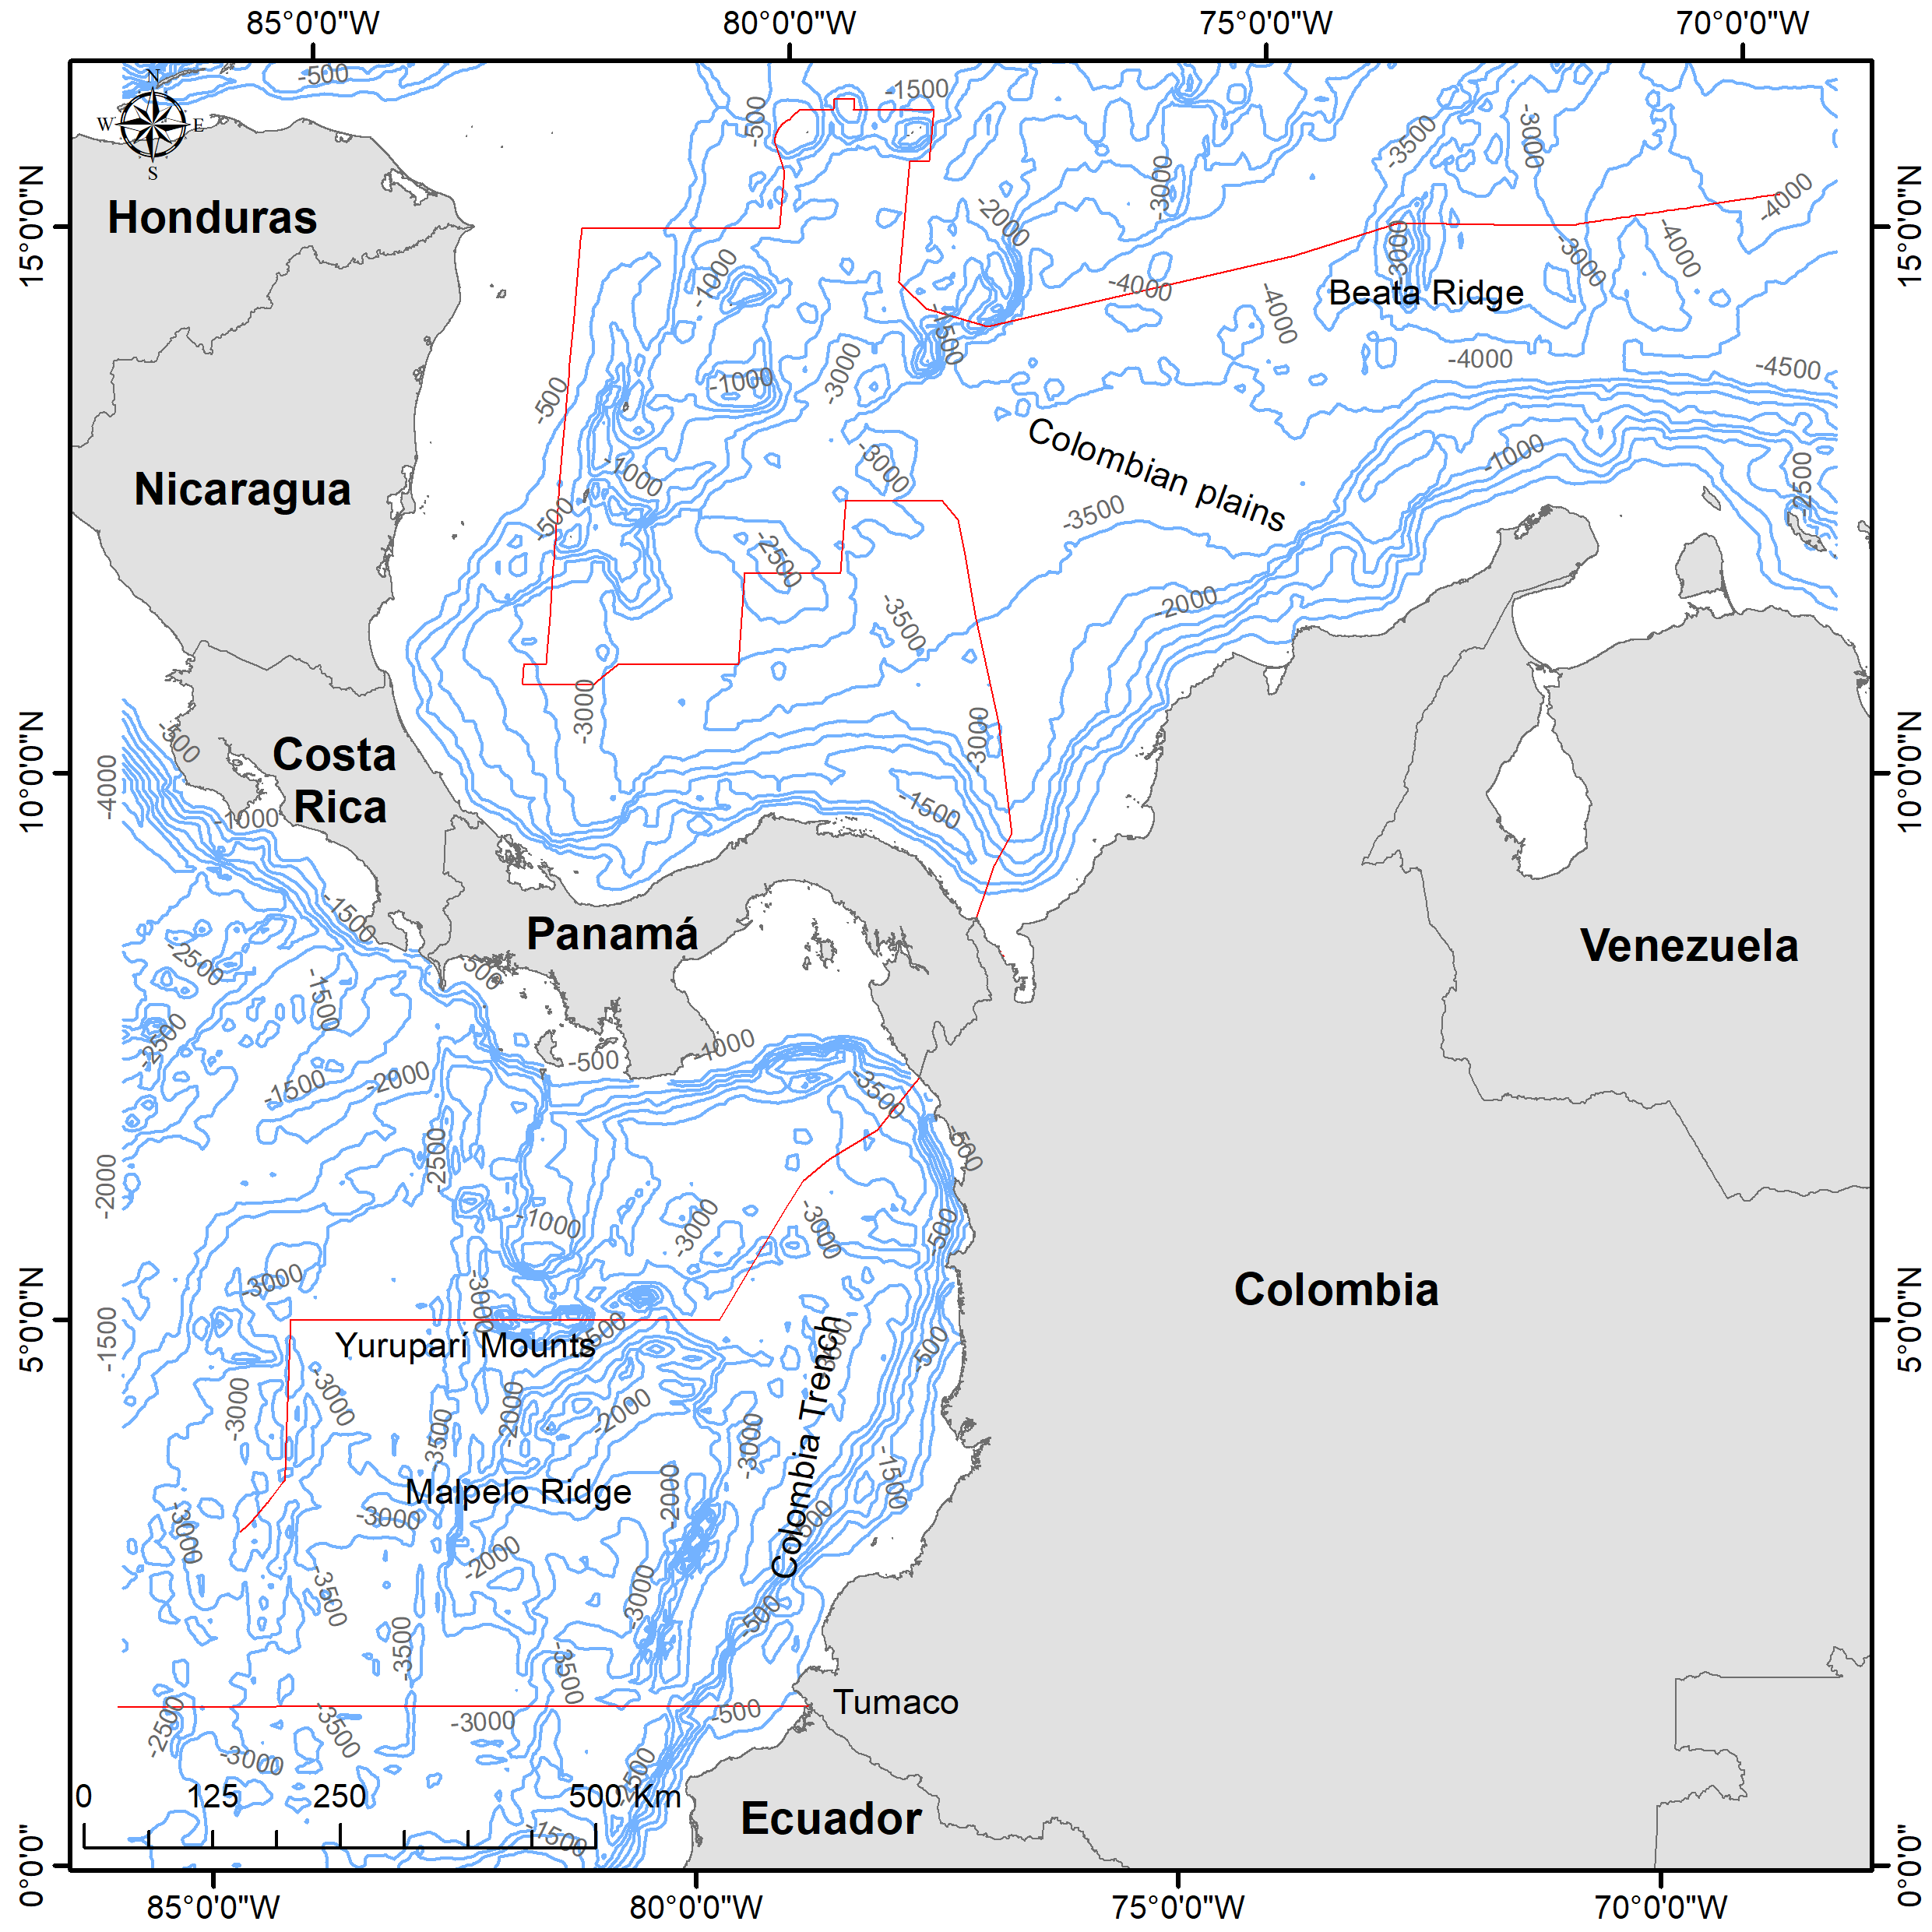 **Figure S1.** Contour lines of the bathymetry of the study area.